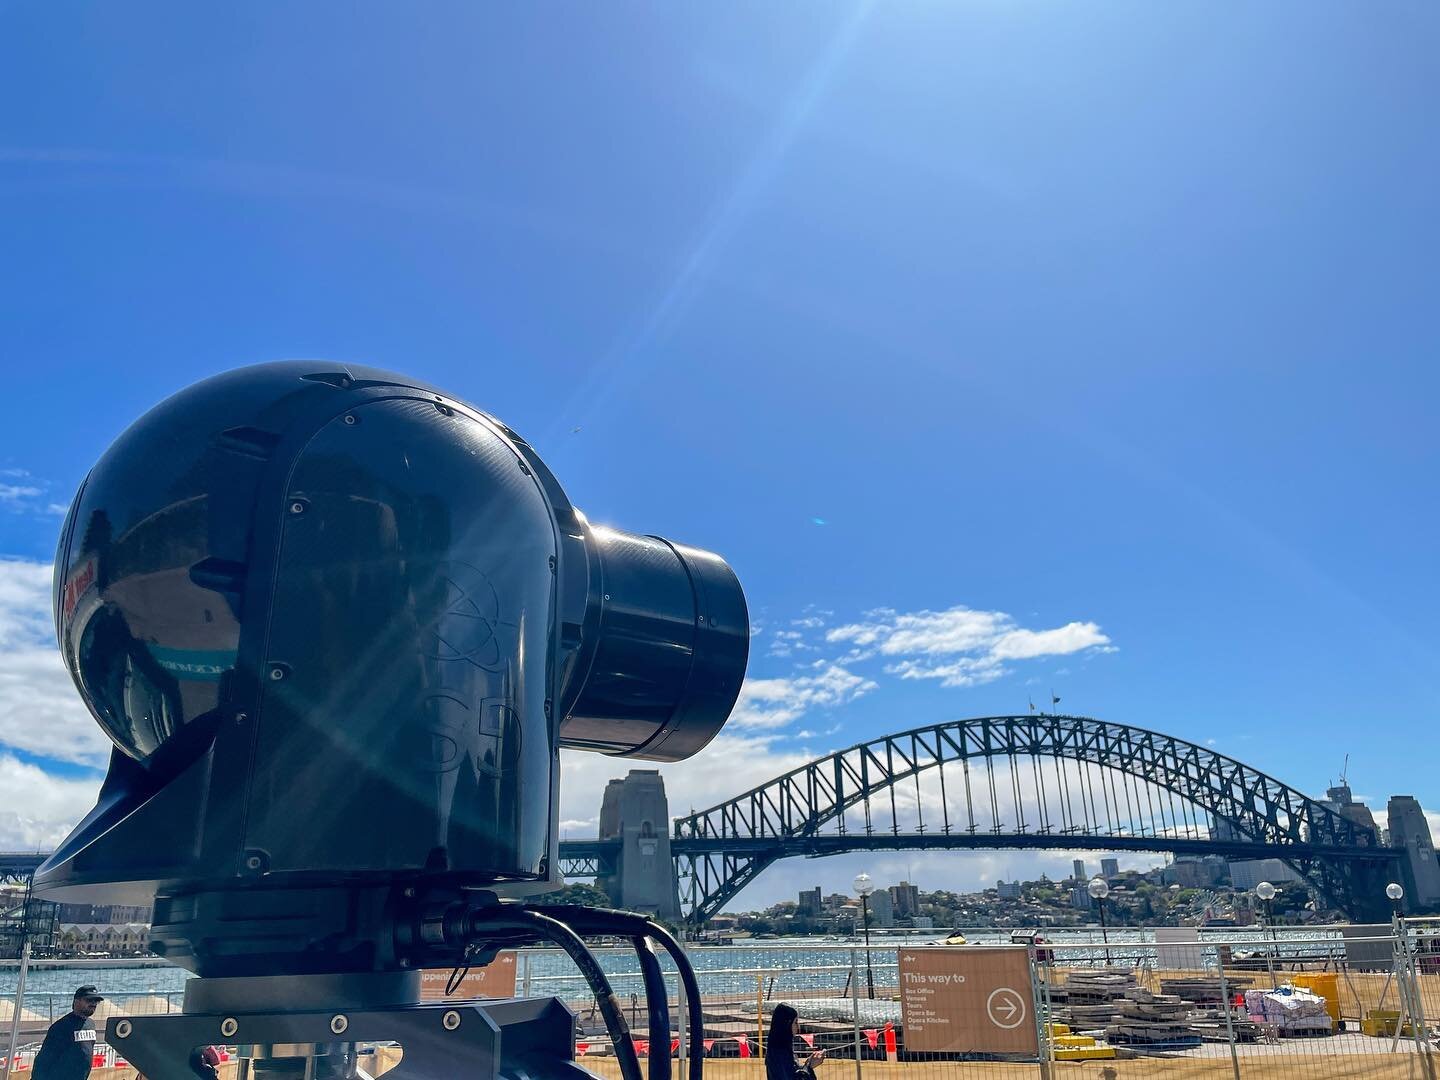 Filming in Sydney is always spectacular, it&rsquo;s not hard to see why. 
.
#blackmoressydneyrunningfestival #filming #trackingvehicle #settingthestandard #behindthebroadcast #outsidebroadcast #tvproduction #behindthescenes #cameracar #griptech #sydn